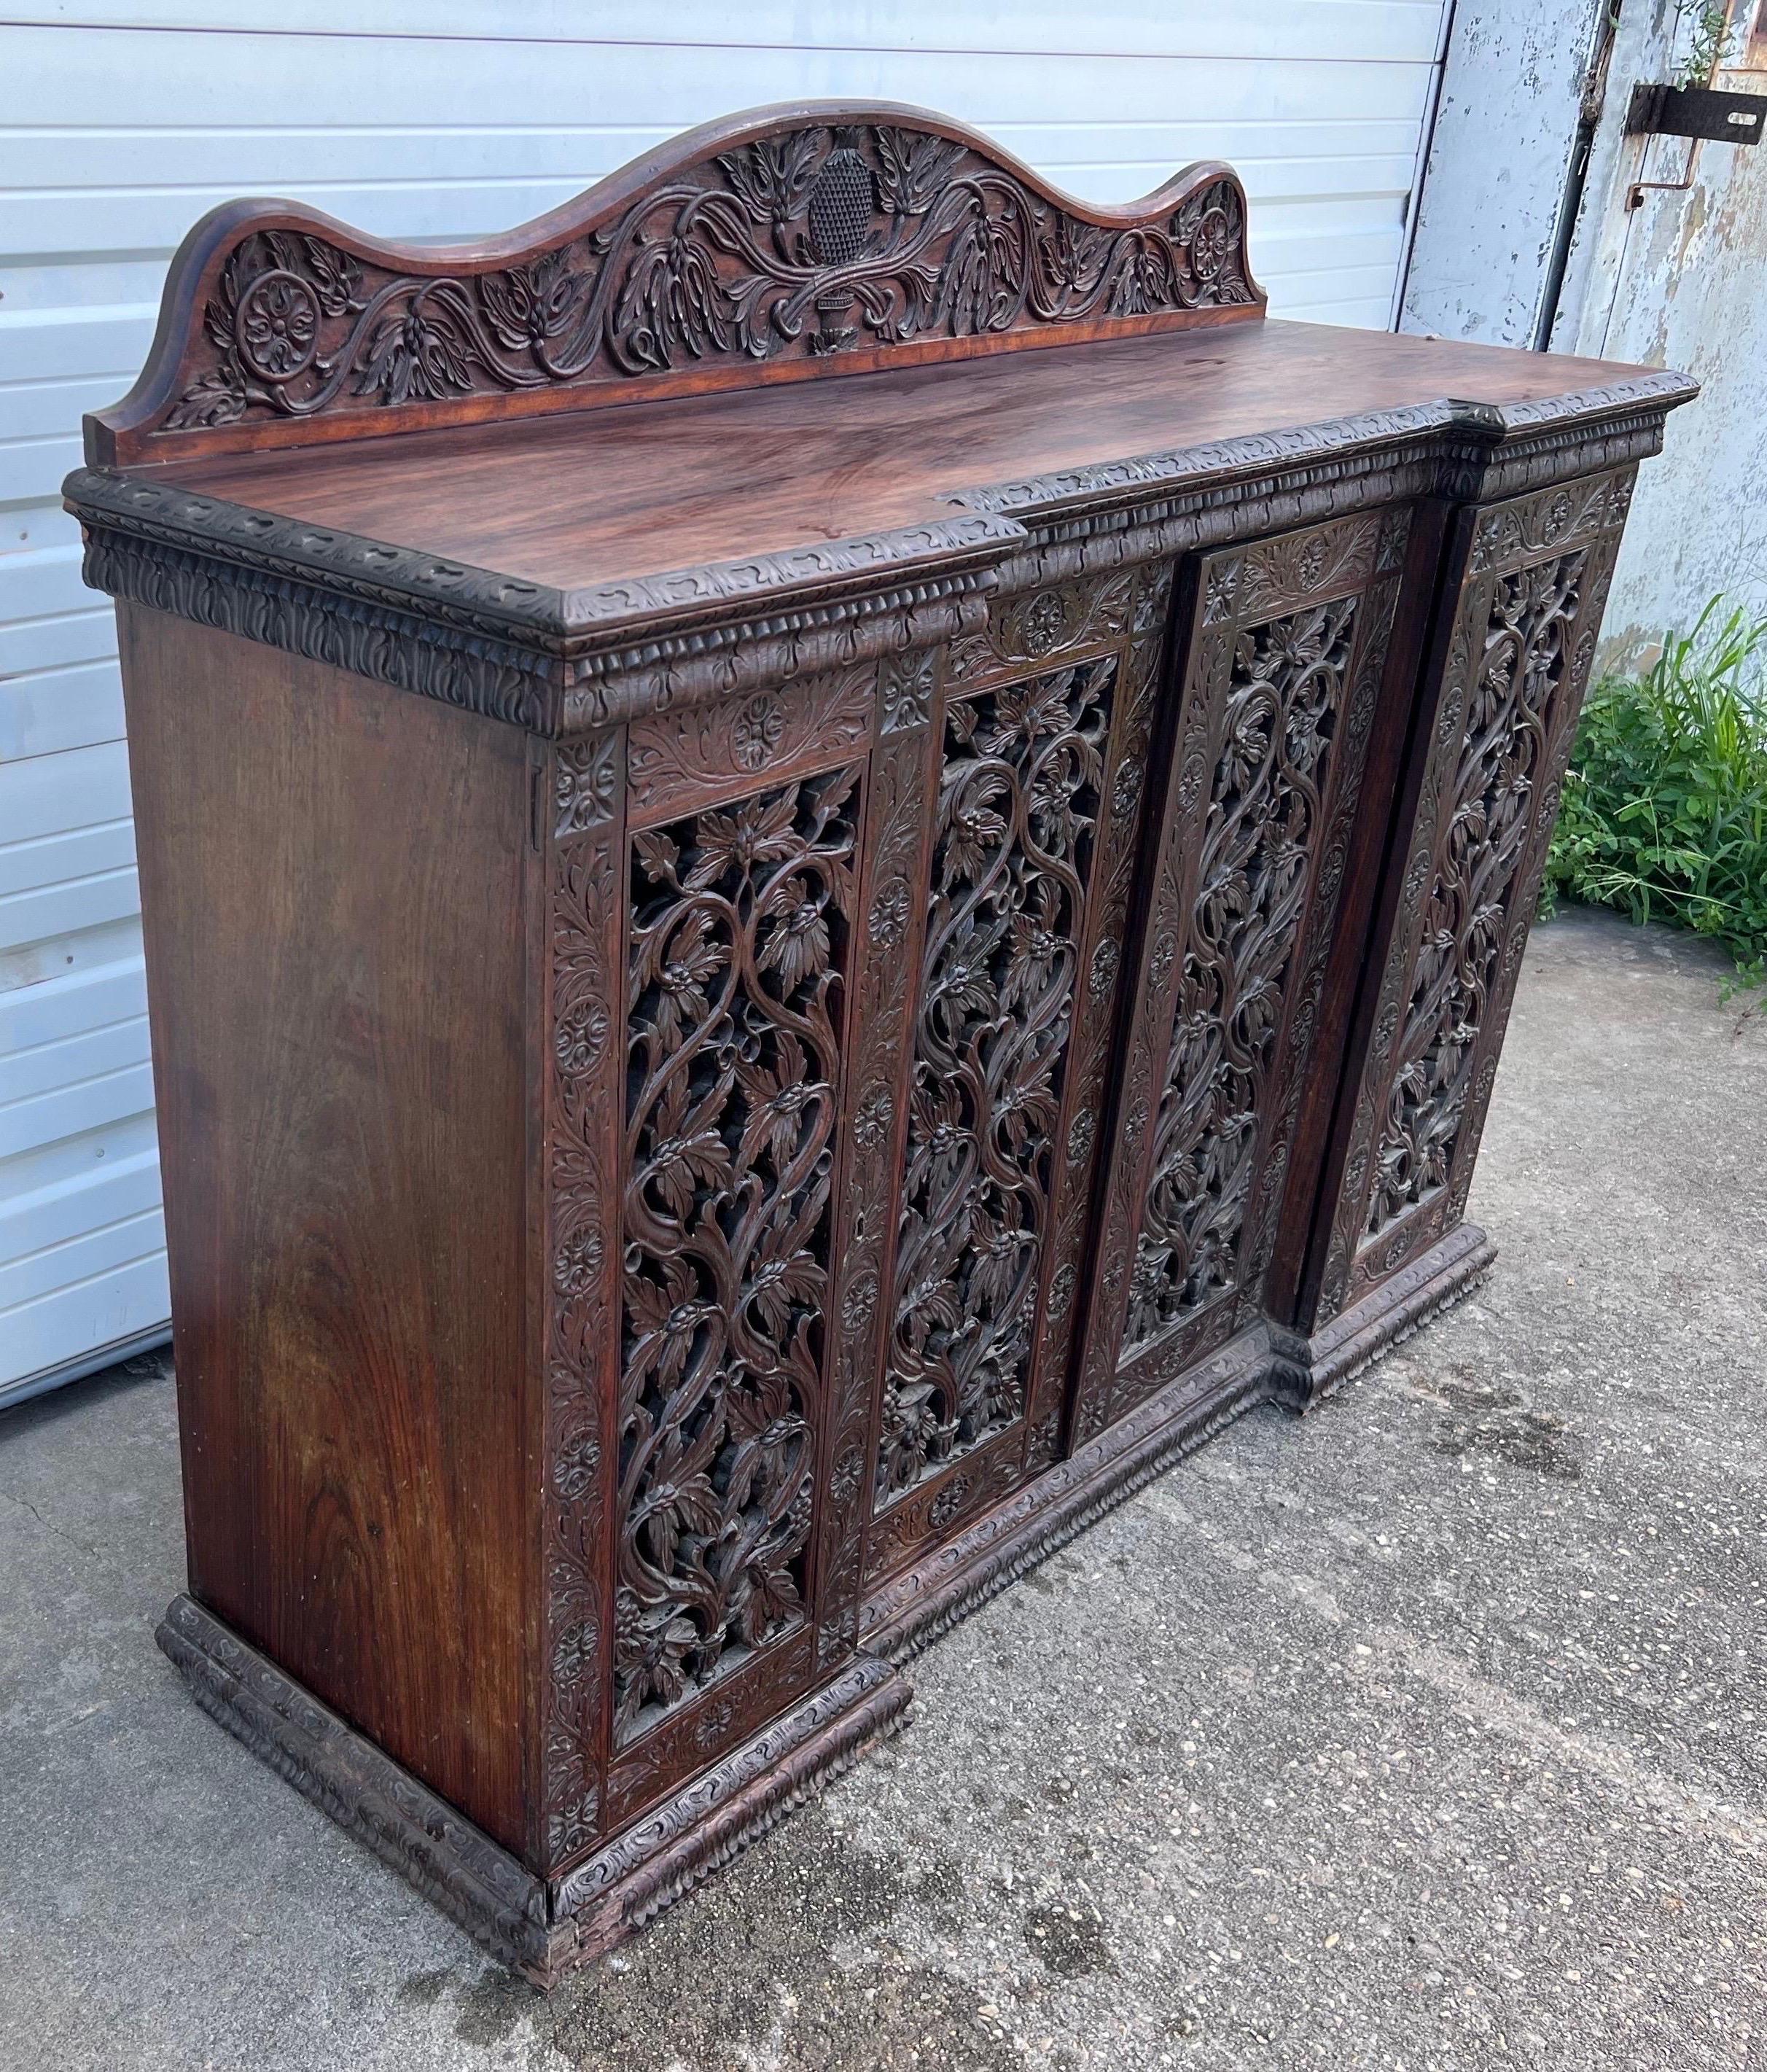 Great quality 19th century Anglo Indian 4 door rosewood credenza with carved pineapple backsplash. Heavily carved doors with hearts and foliage covering the cabinet and shelves. Great for a bar or media storage.